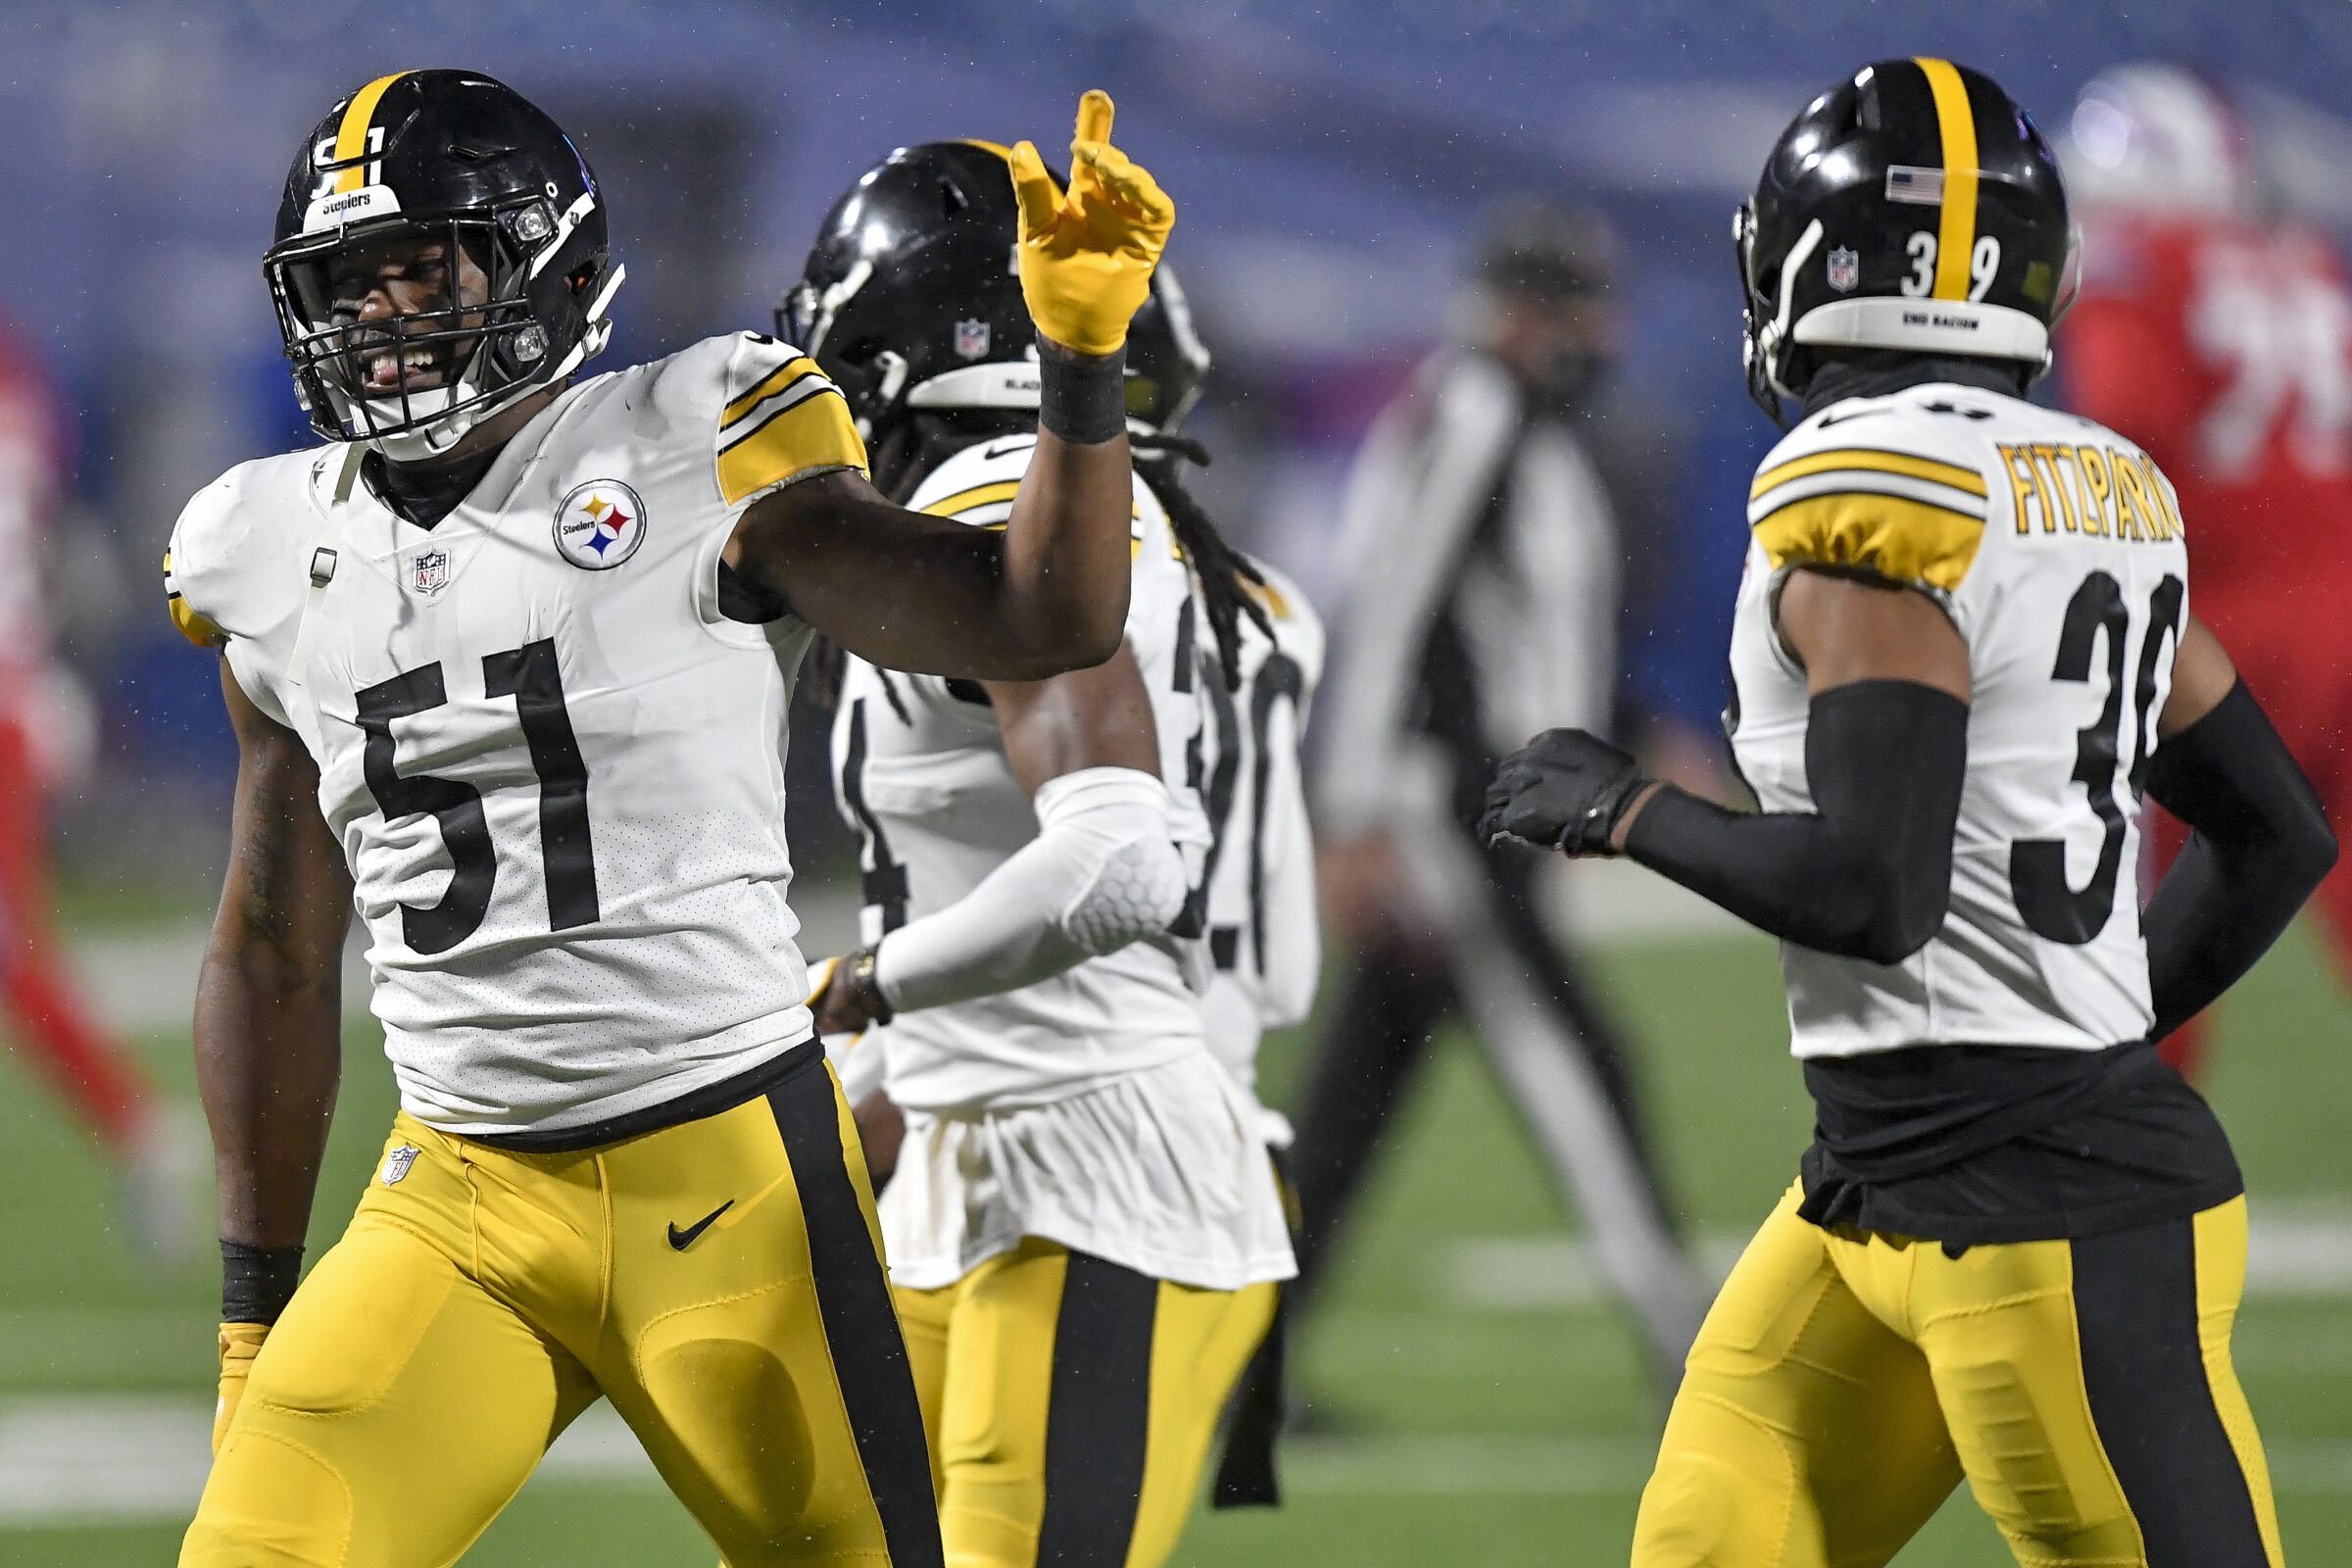 Pittsburgh Steelers linebacker Avery Williamson celebrates a defensive stop against the Buffalo Bills.